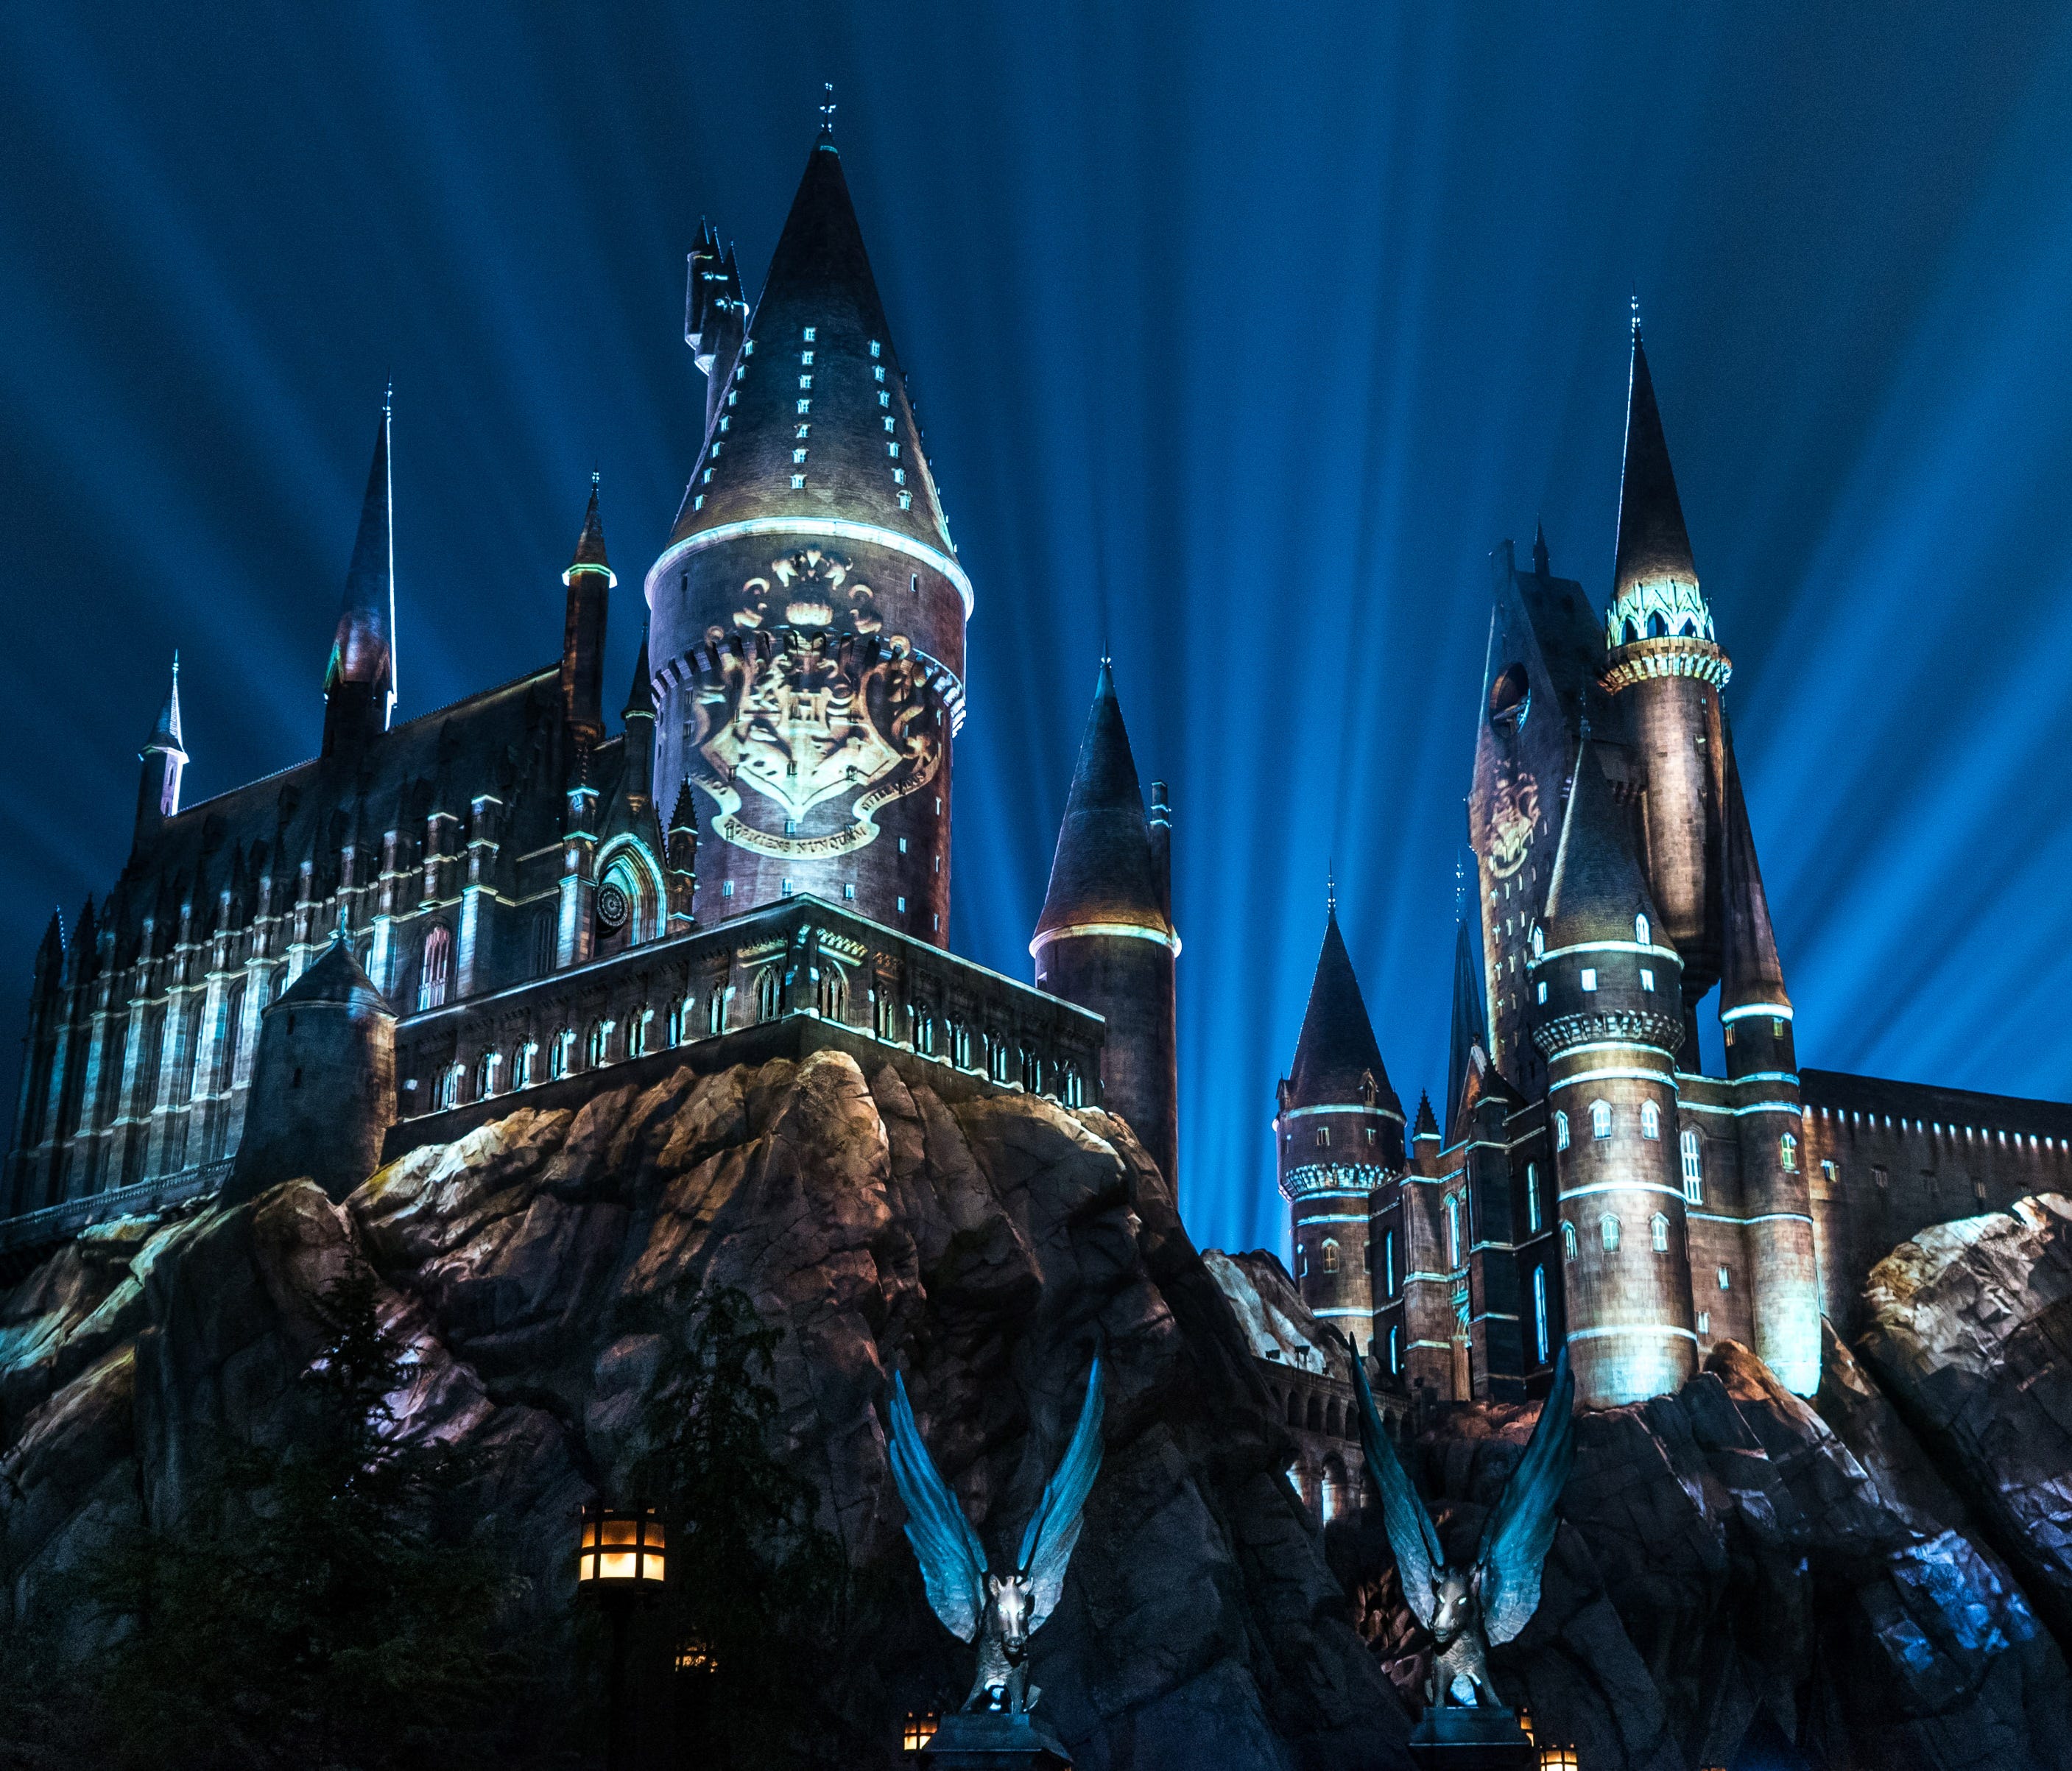 For the first time ever at Universal Orlando Resort, guests will be able to celebrate their Hogwarts house pride during an all-new, breathtaking experience – The Nighttime Lights at Hogwarts Castle – debuting on Wed., Jan. 31 and running select night